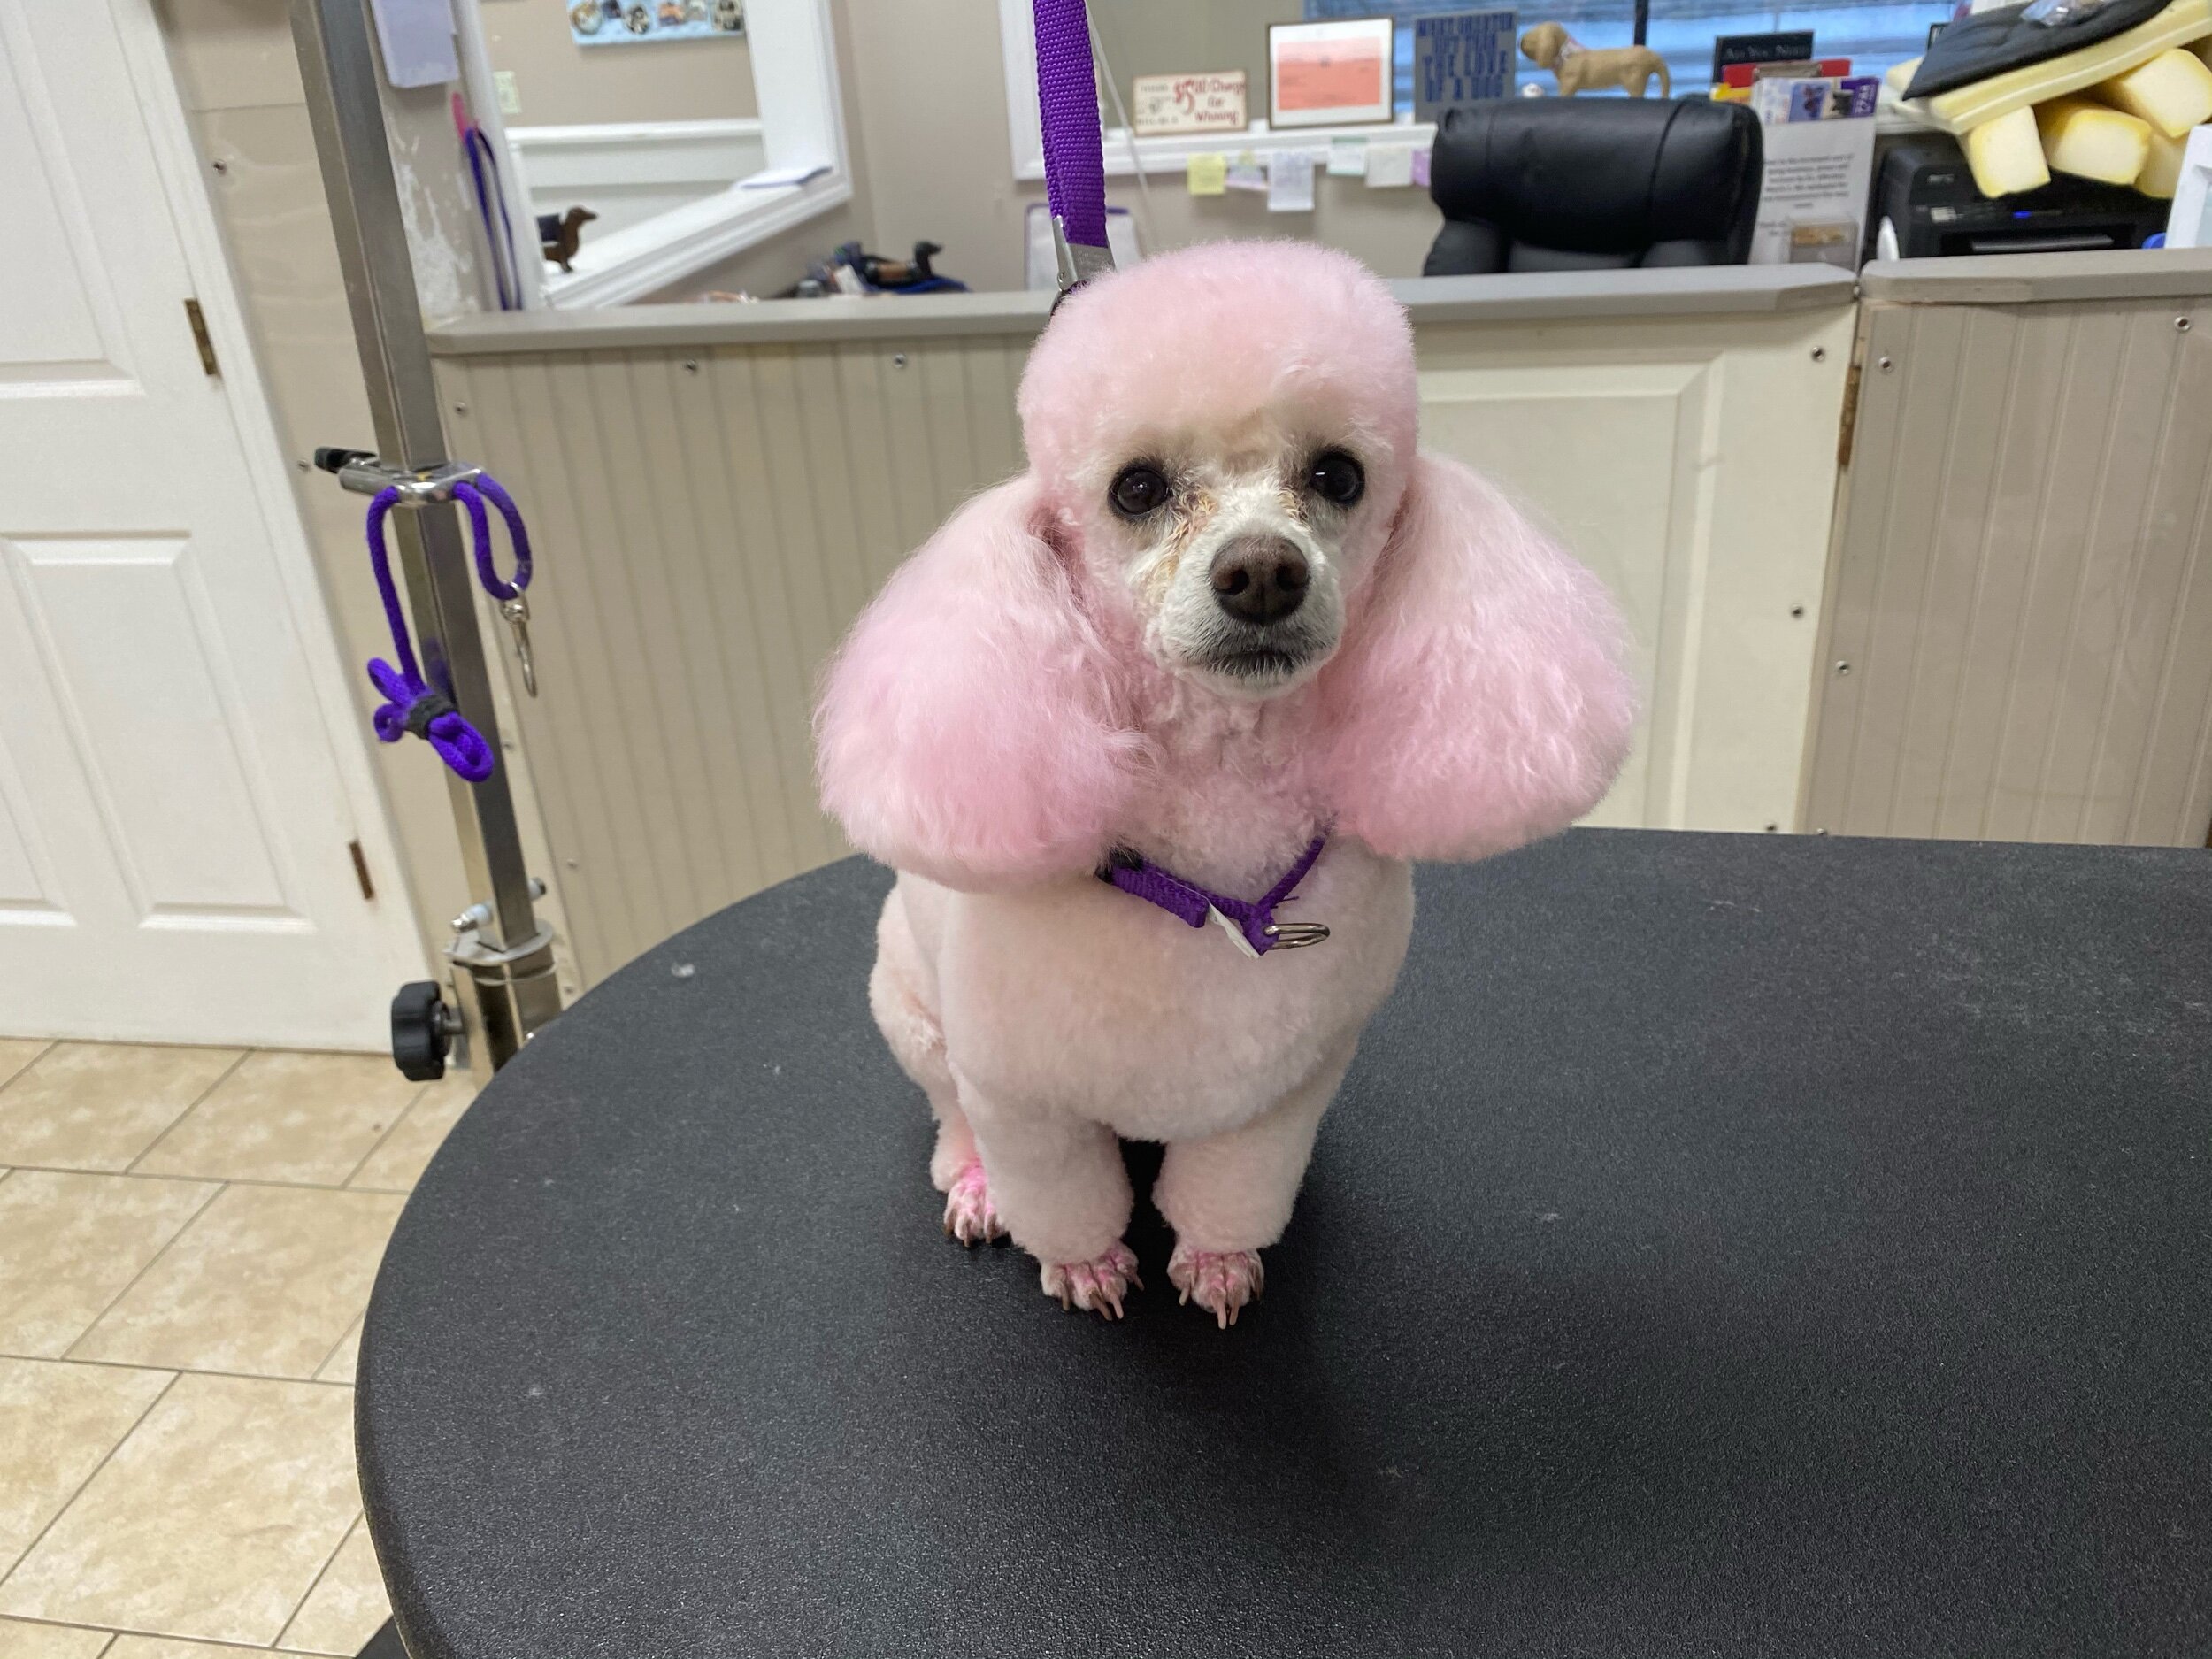 At Perfect Paw we love styling your dog just the way you like it! Stop by our Syracuse salon today!